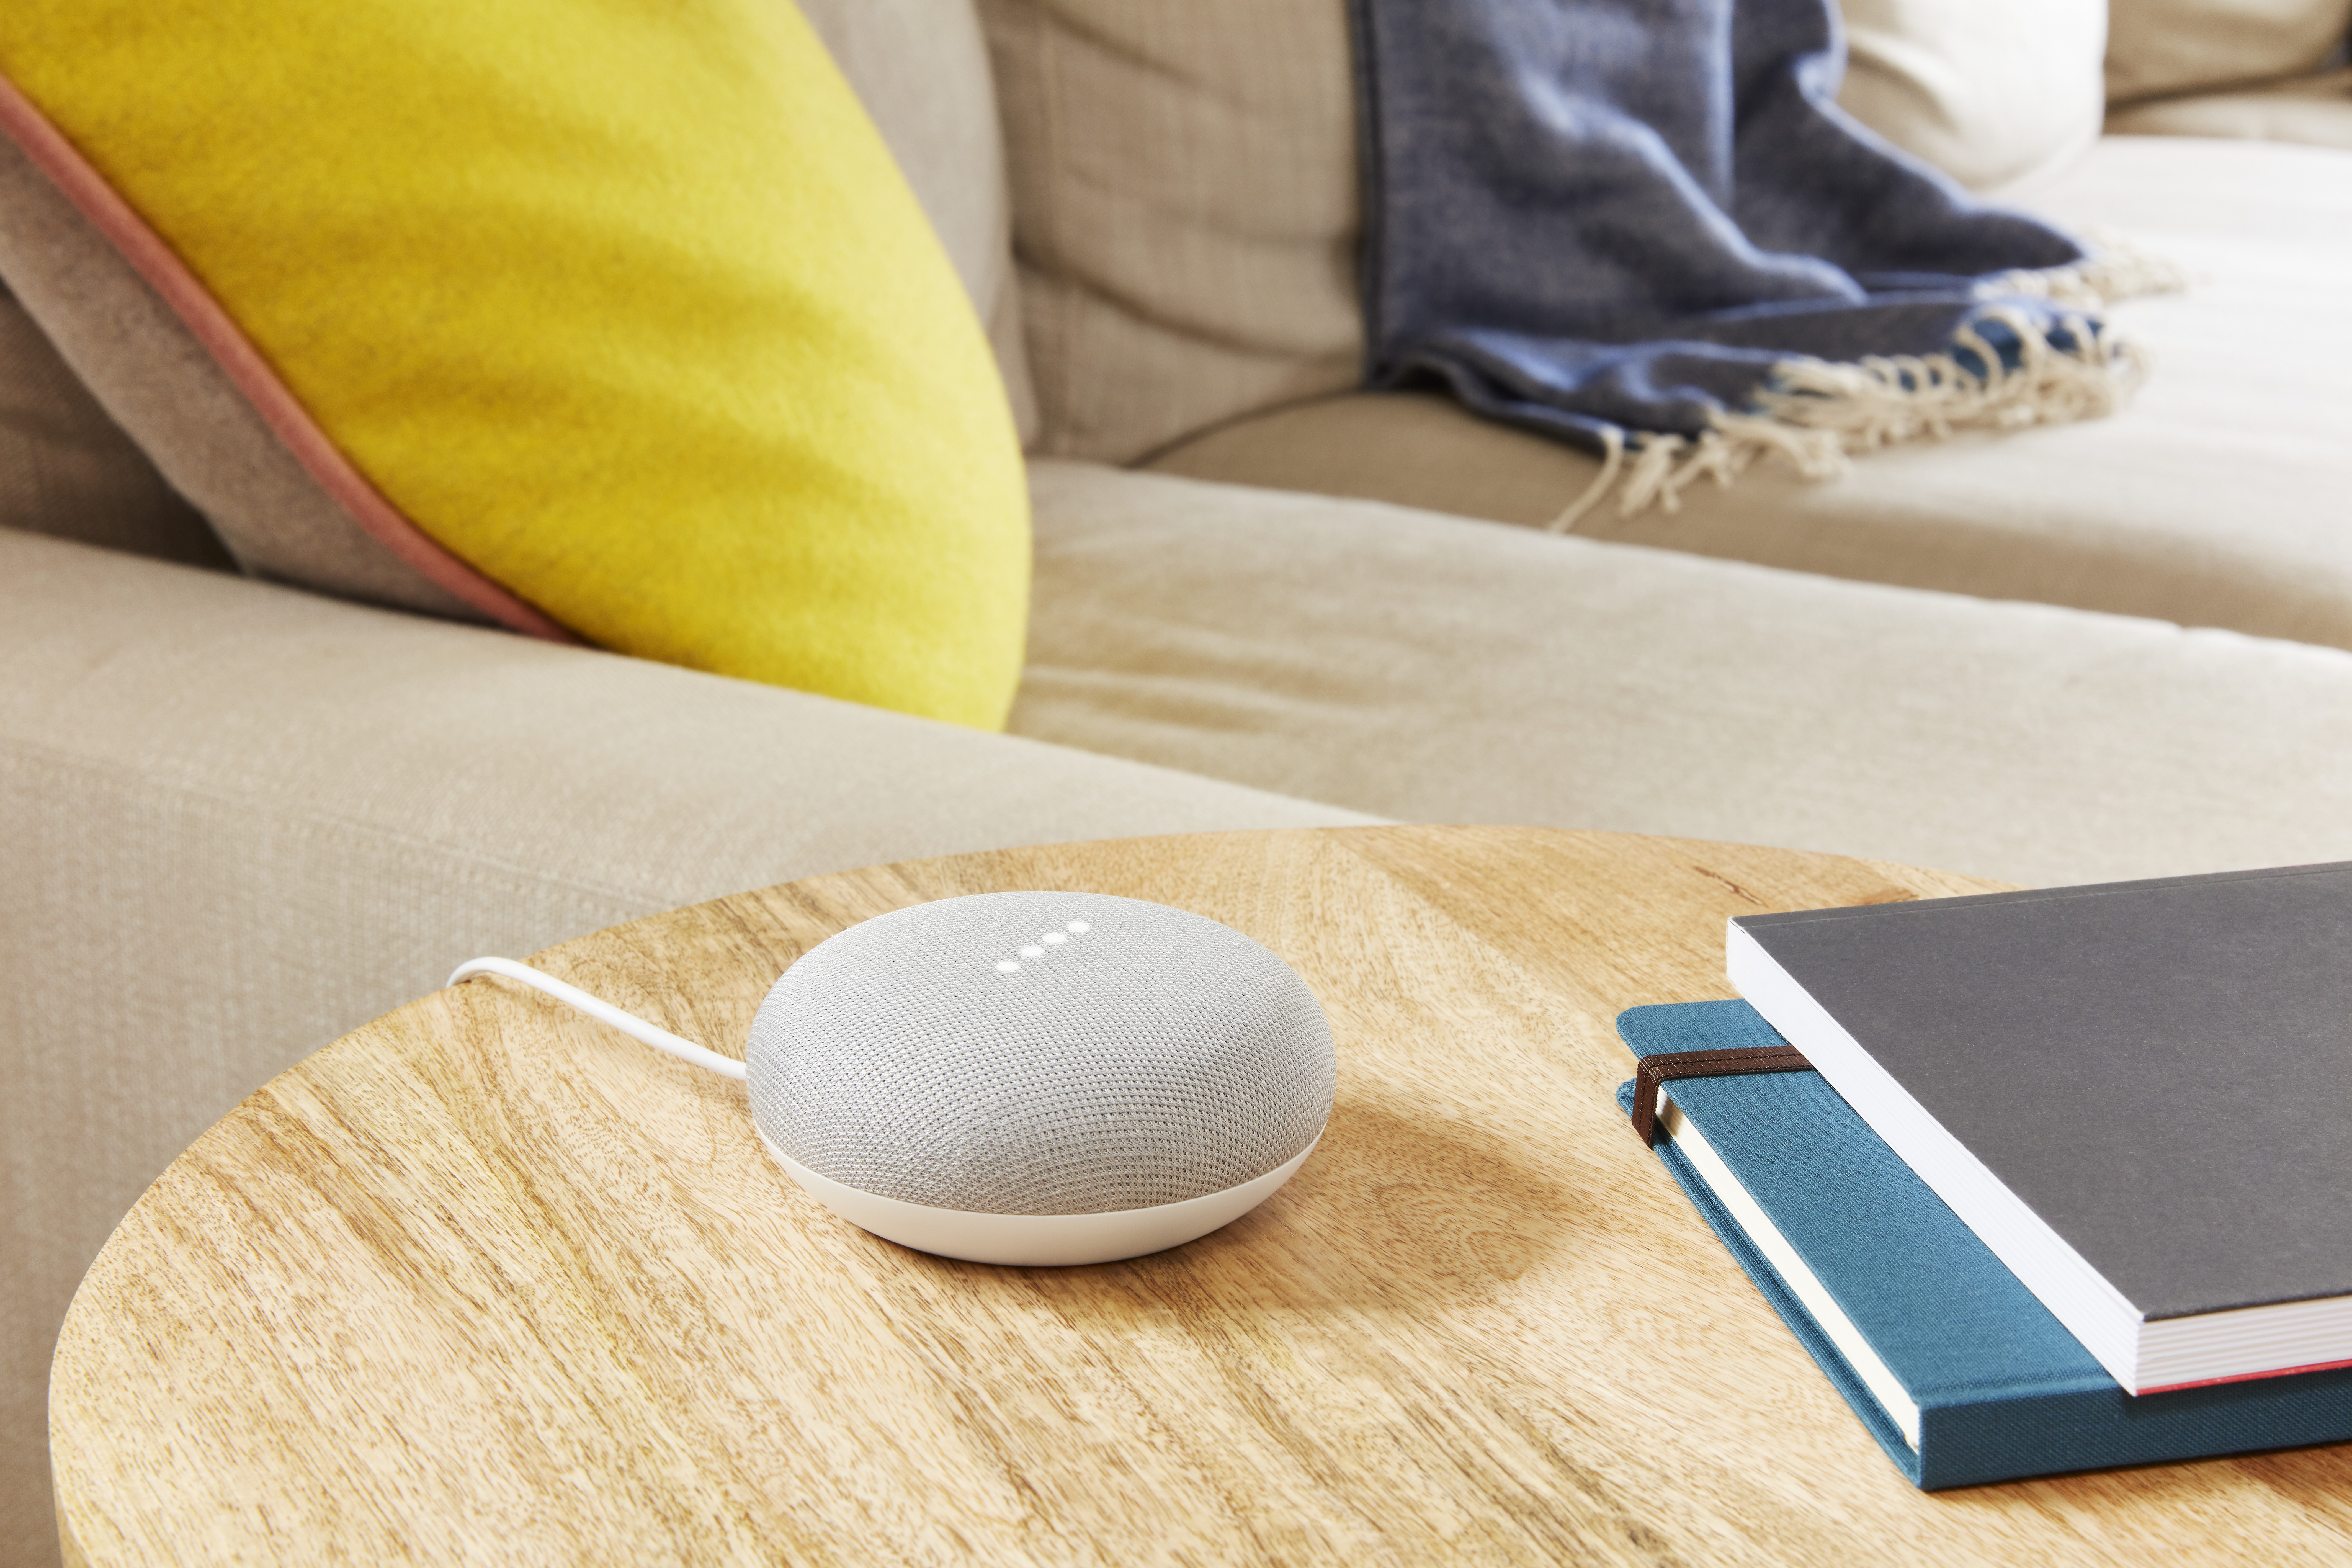 Get hands-free help with Google Home Mini